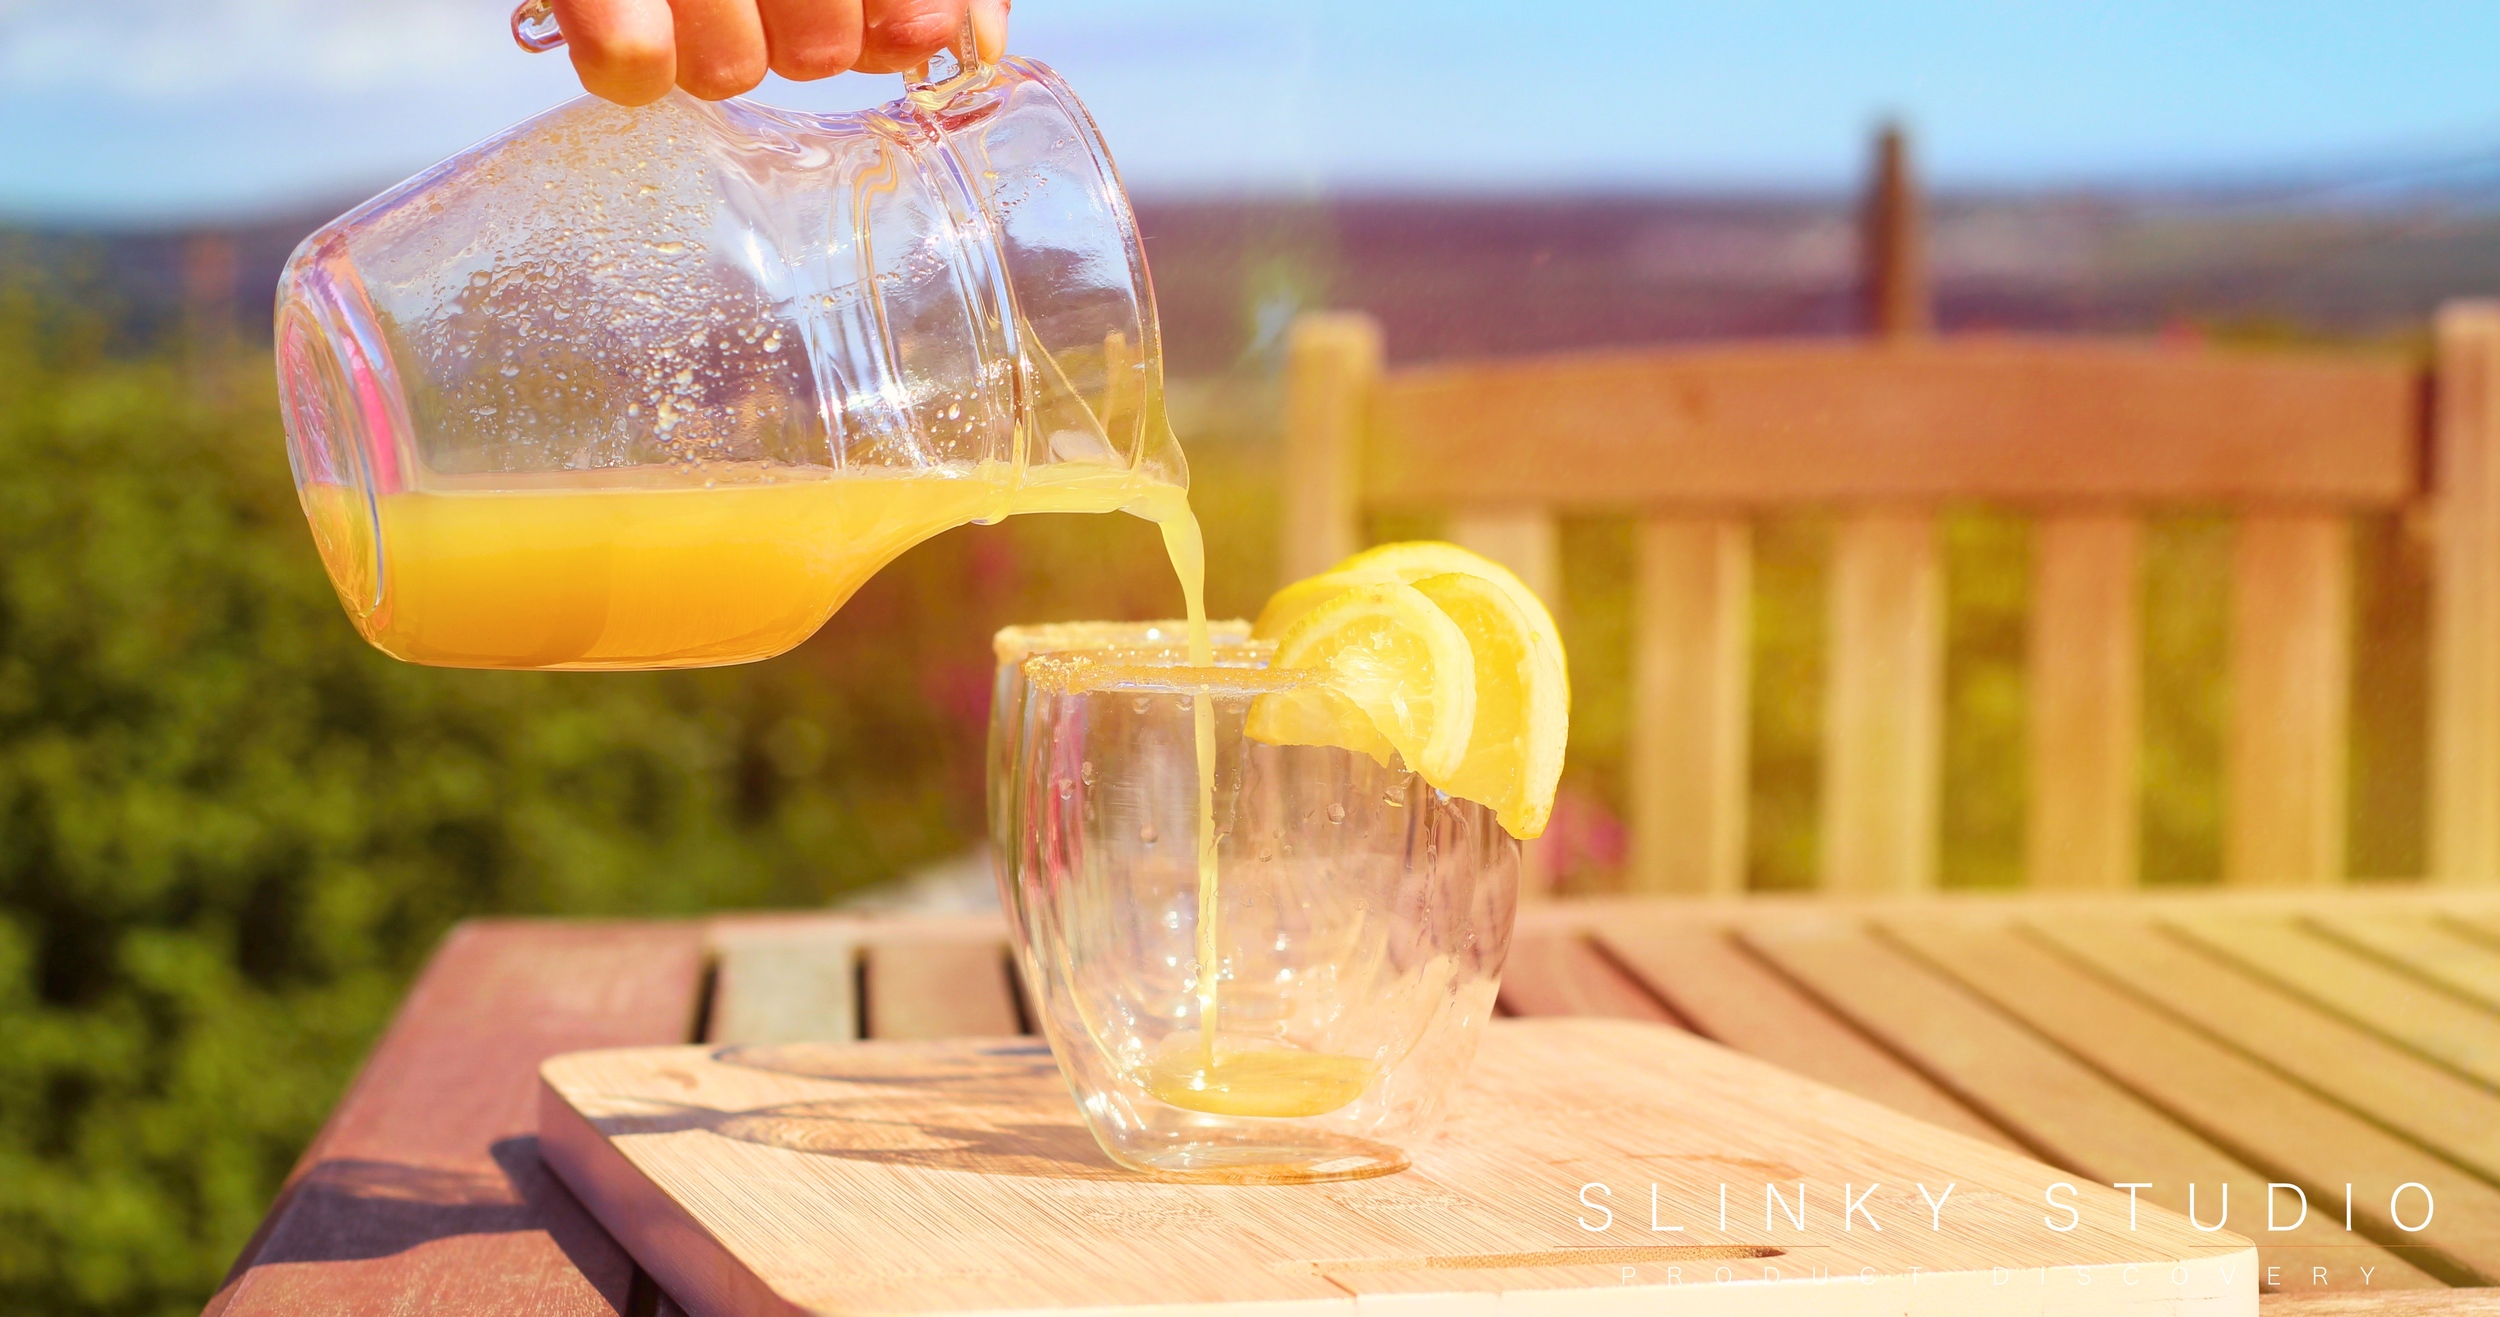 Optimum ThermoCook Ginger Beer Being Poured On Bench in Sun.jpg